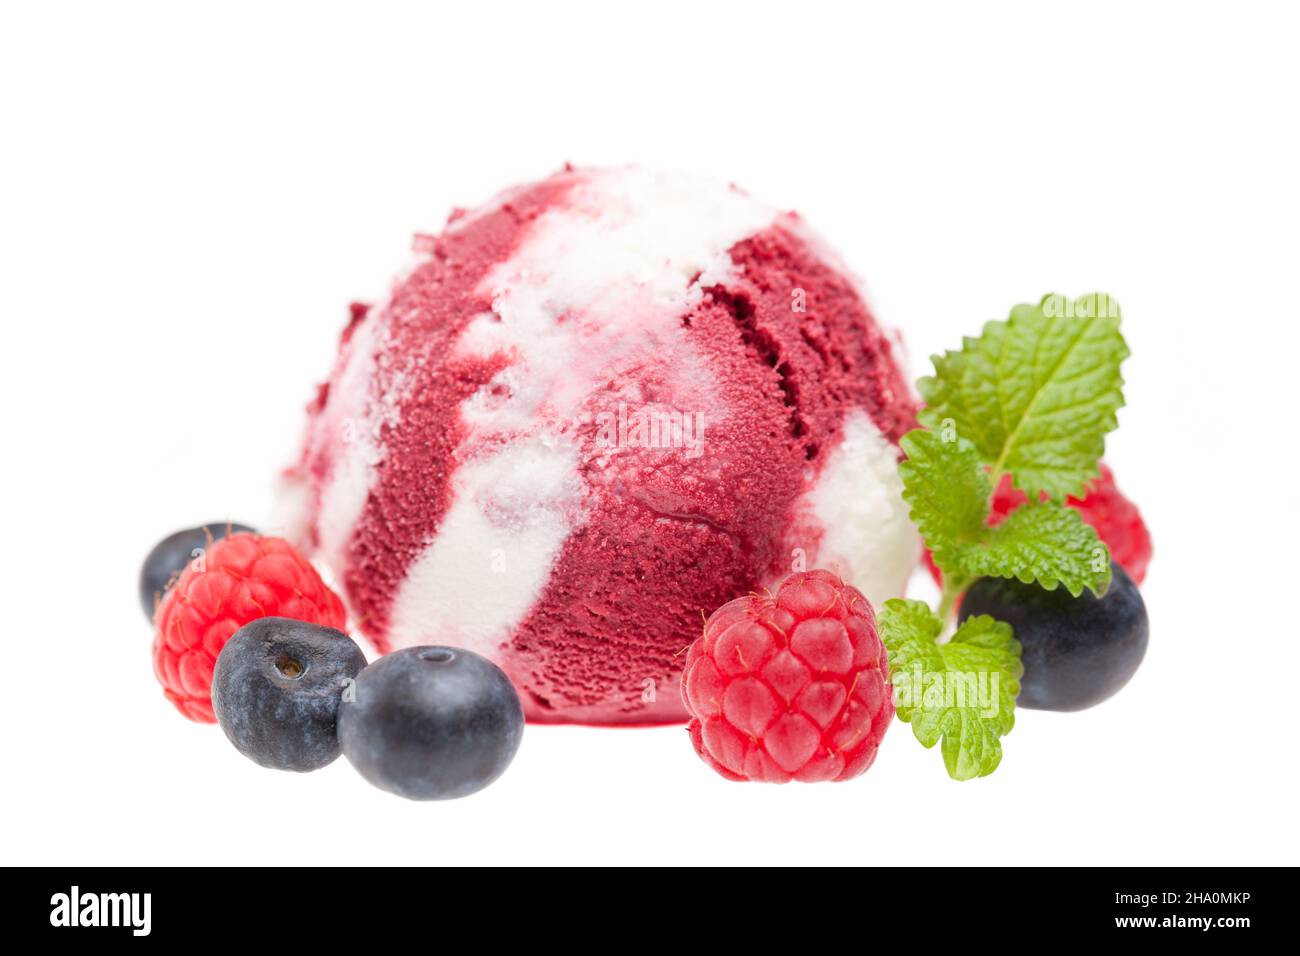 ice ball, white, mint, front, red, stripes, colorful, berries, wild berry ice cream, ice cream, close-up, great, leaves, whole, raspberries, raspberry Stock Photo